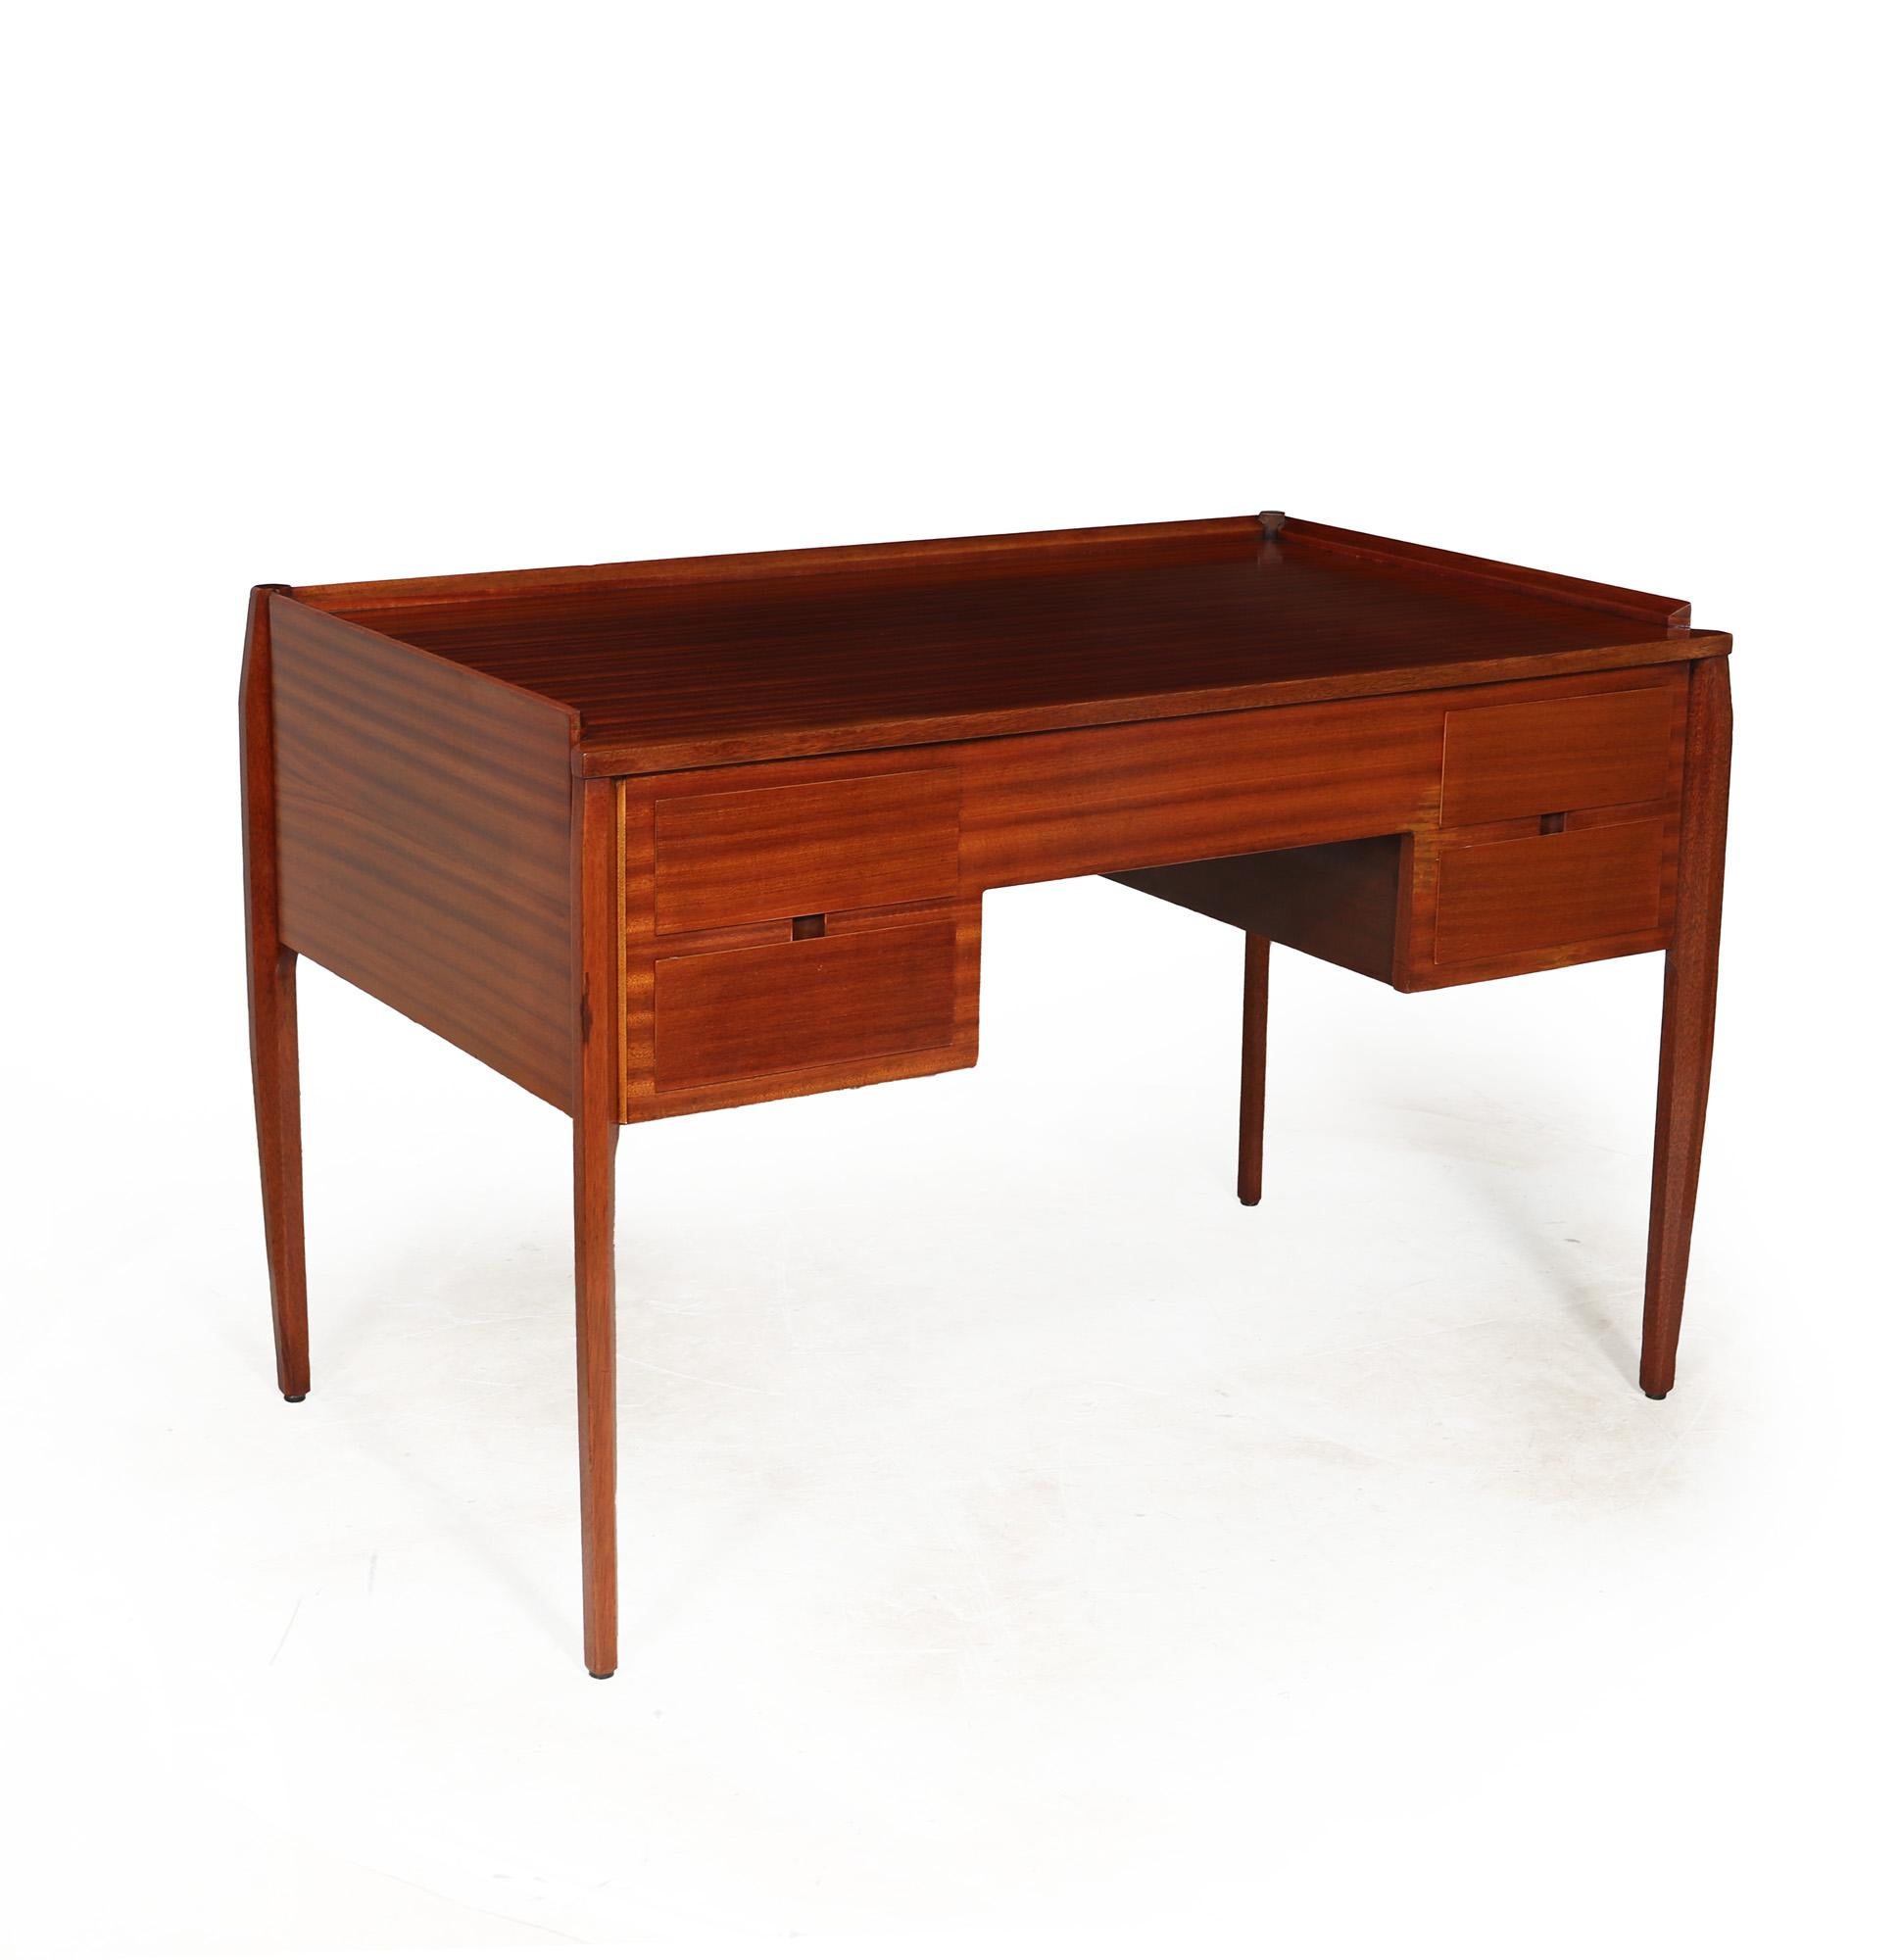 DESK BY GIO PONTI
A midcentury desk produced in Italy by Italian master Gio Ponti, good solid construction with Sapele veneer.Its sleek and minimalistic design is enhanced by elegantly shaped legs and a galleried top. Believed to have been created